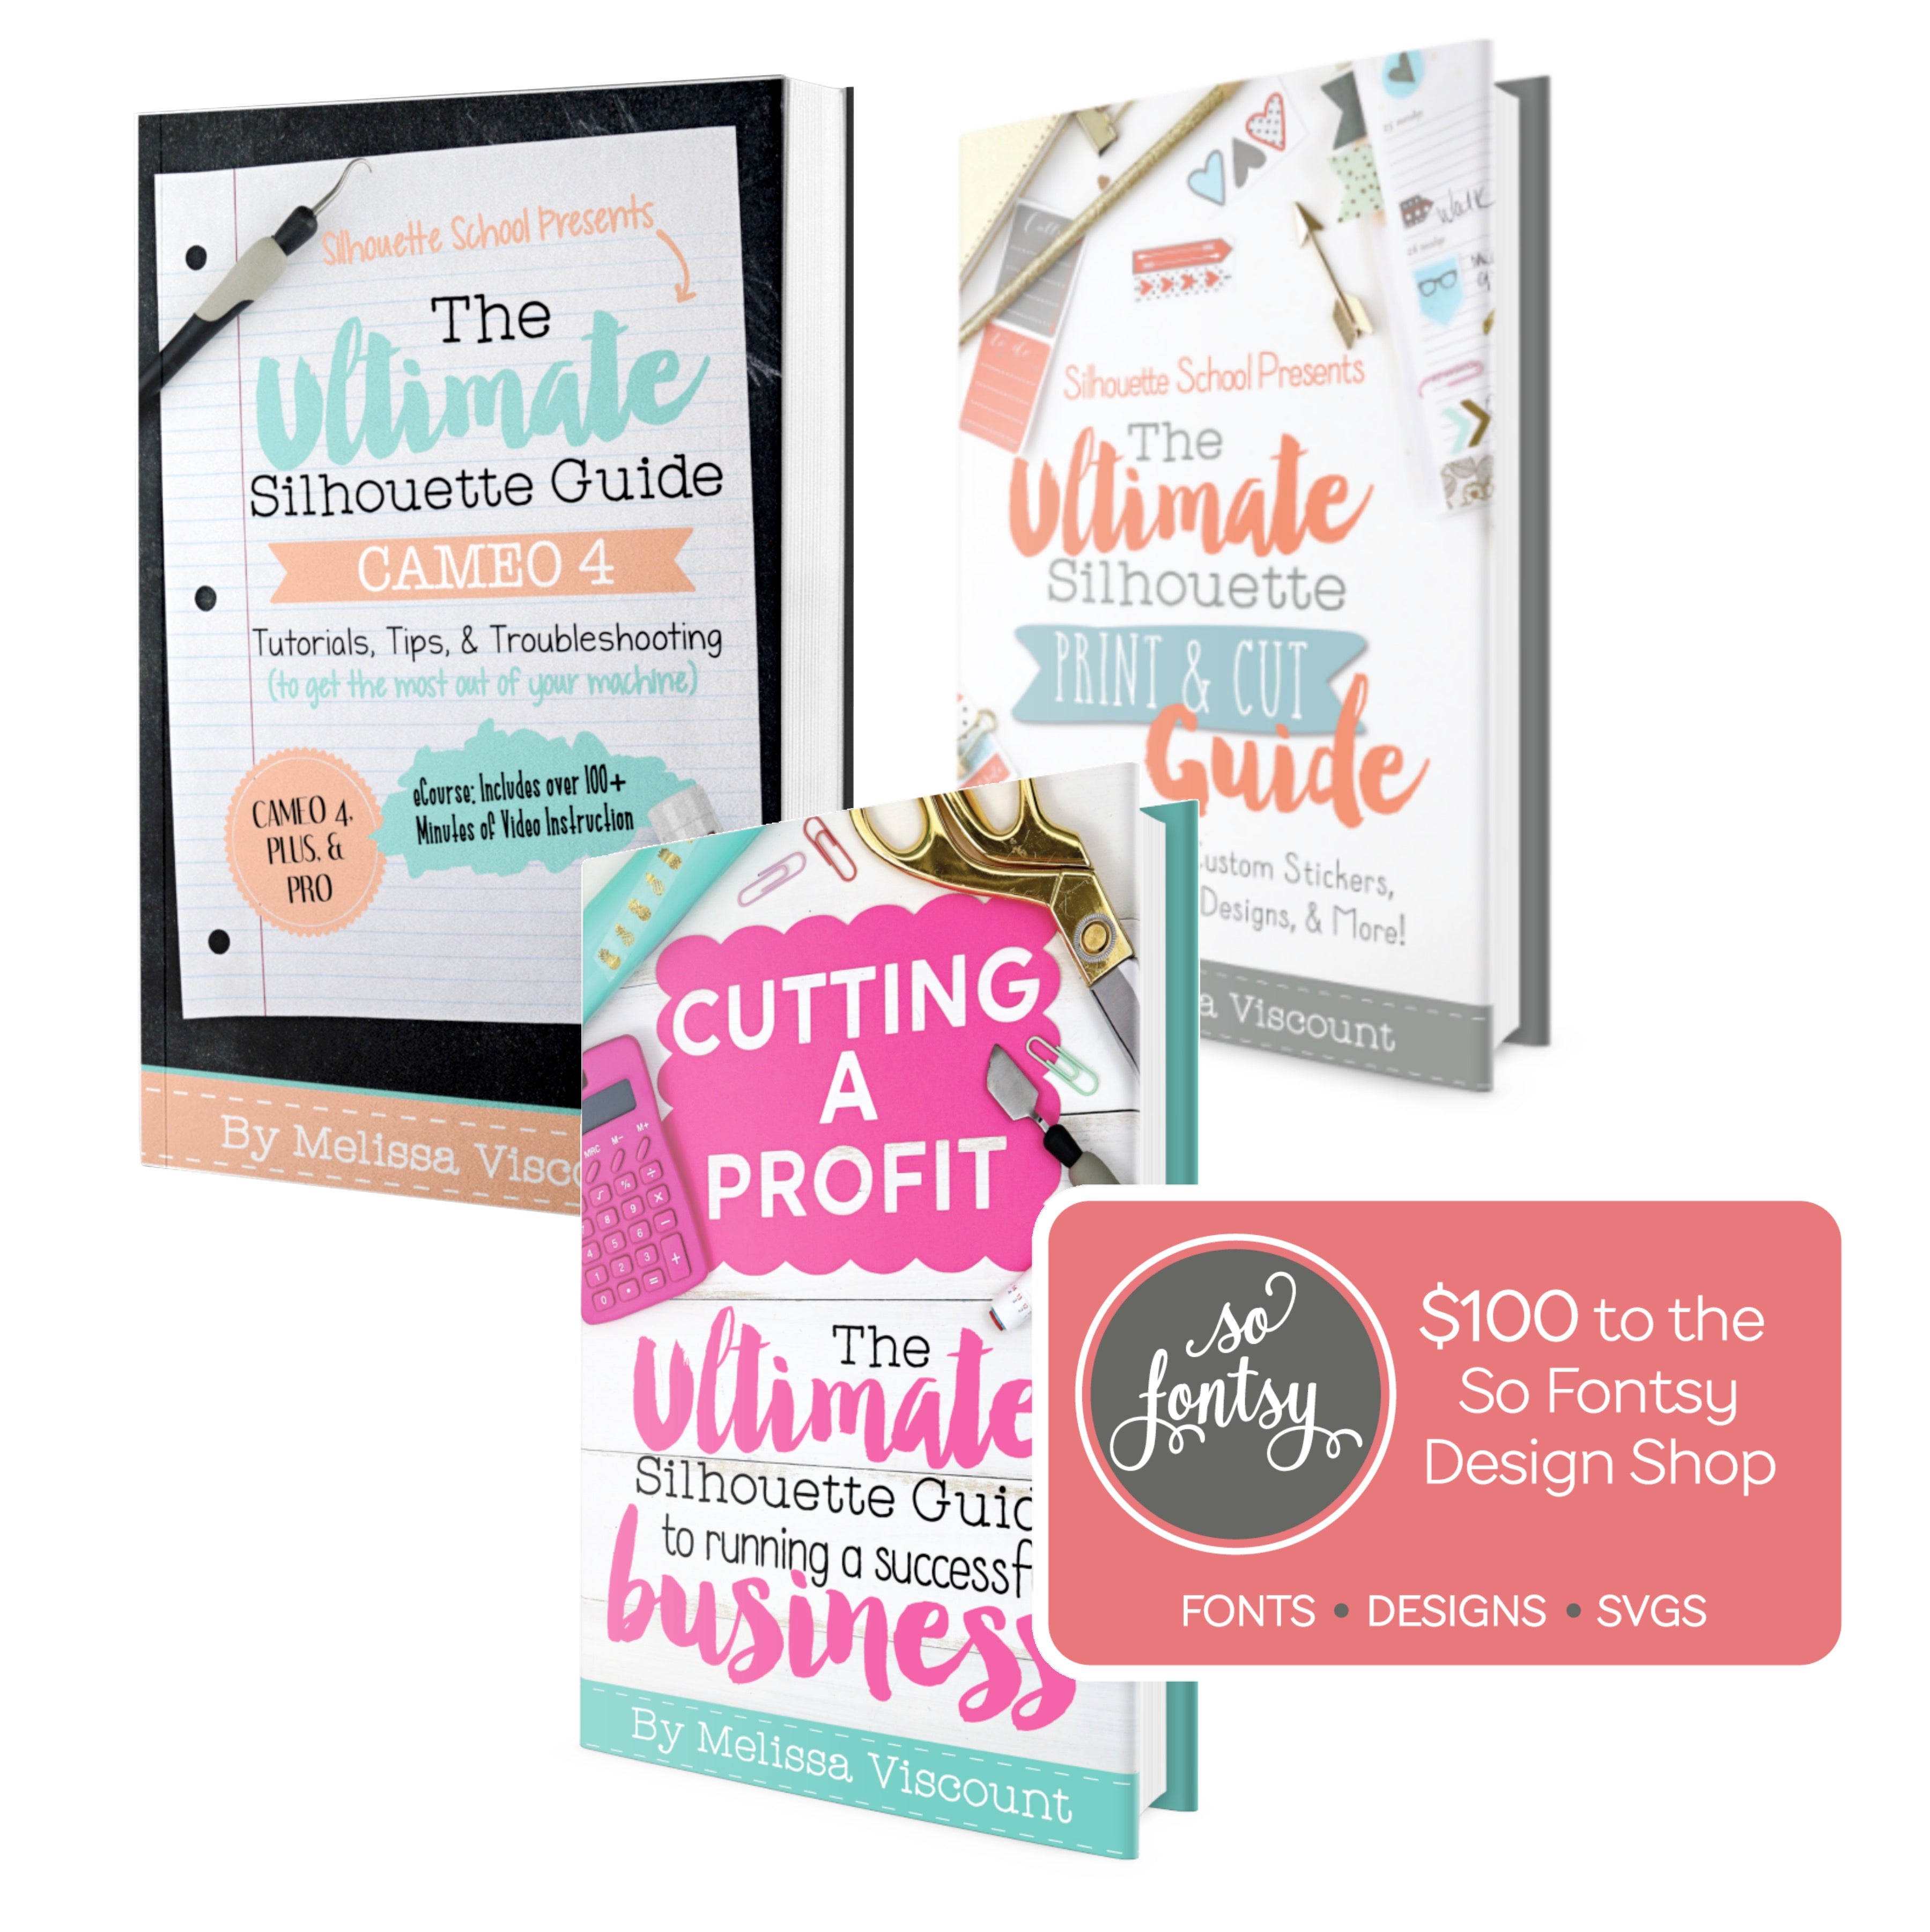 The Ultimate Silhouette Print and Cut Boss Lady eBook Bundle